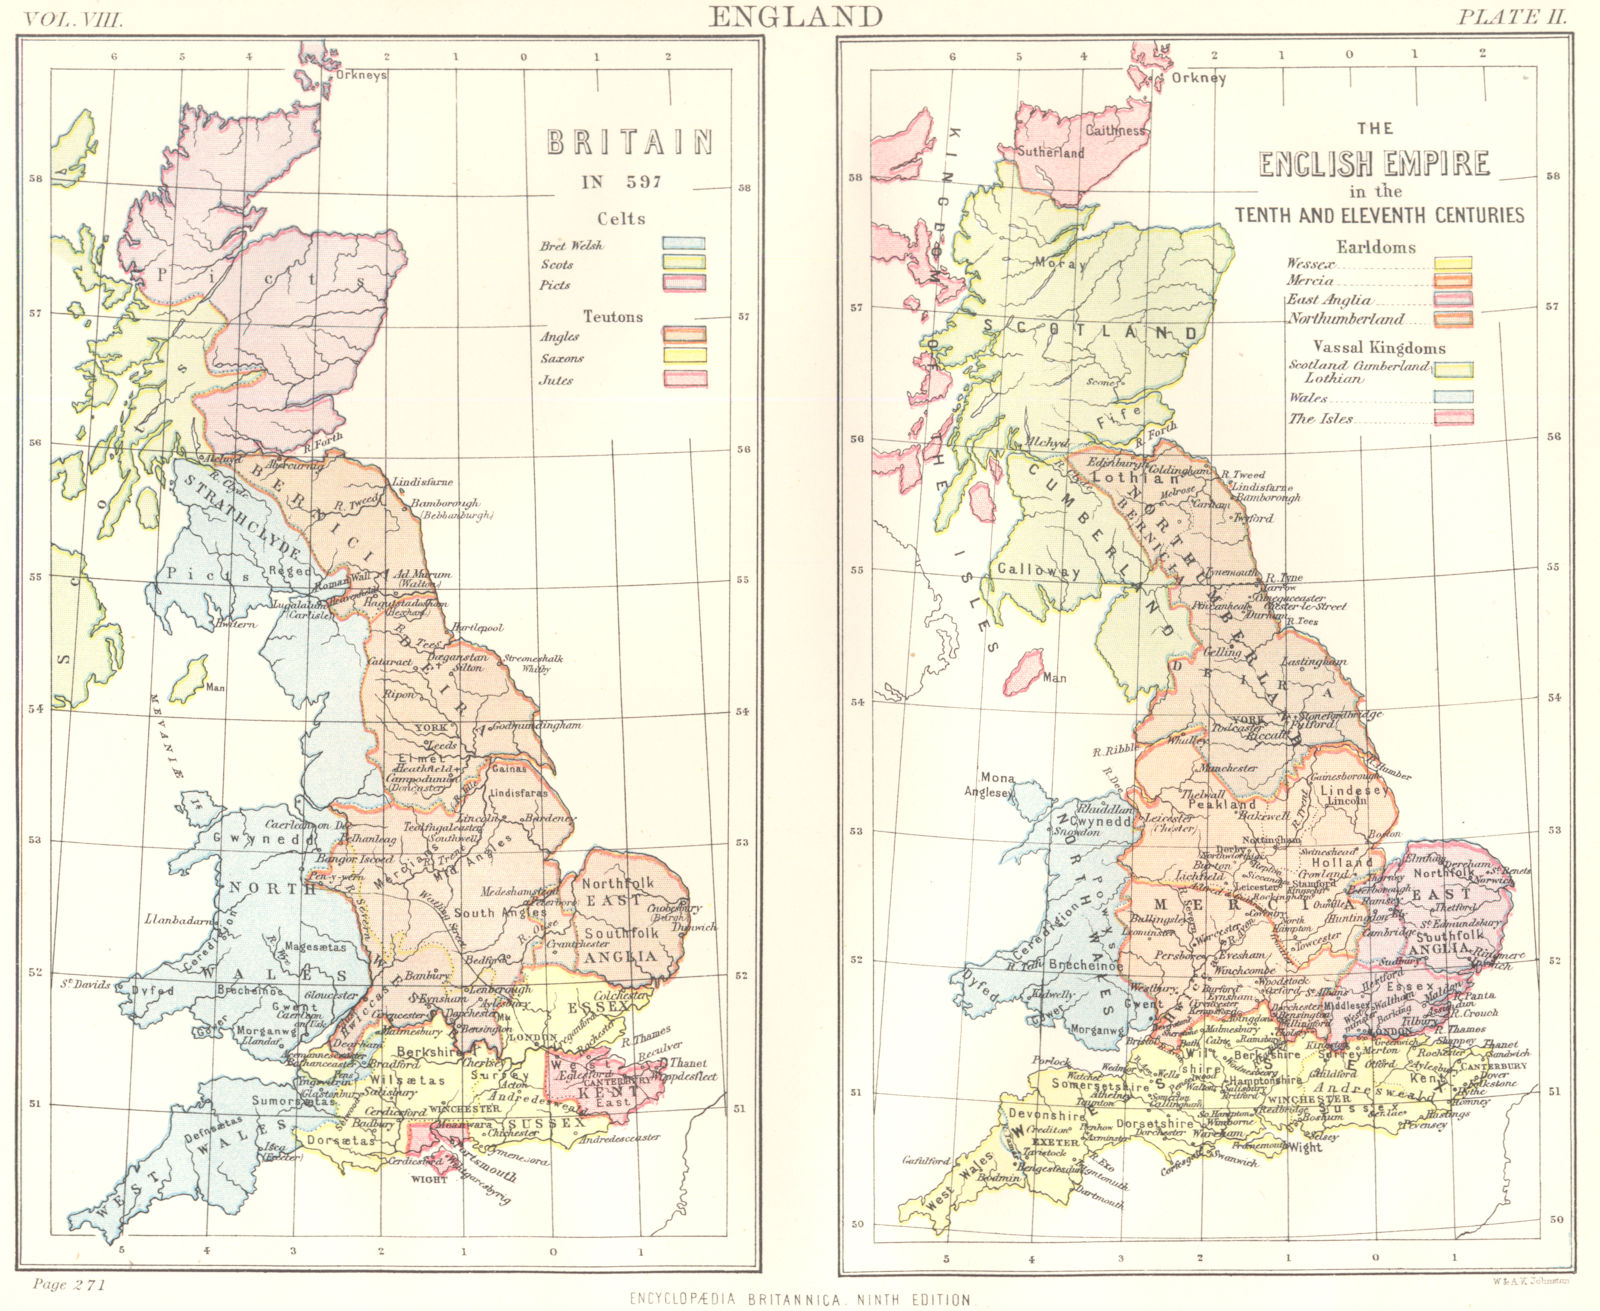 GREAT BRITAIN. in 597 tribes Celts Teutons.English Empire.10-11C earls 1898 map